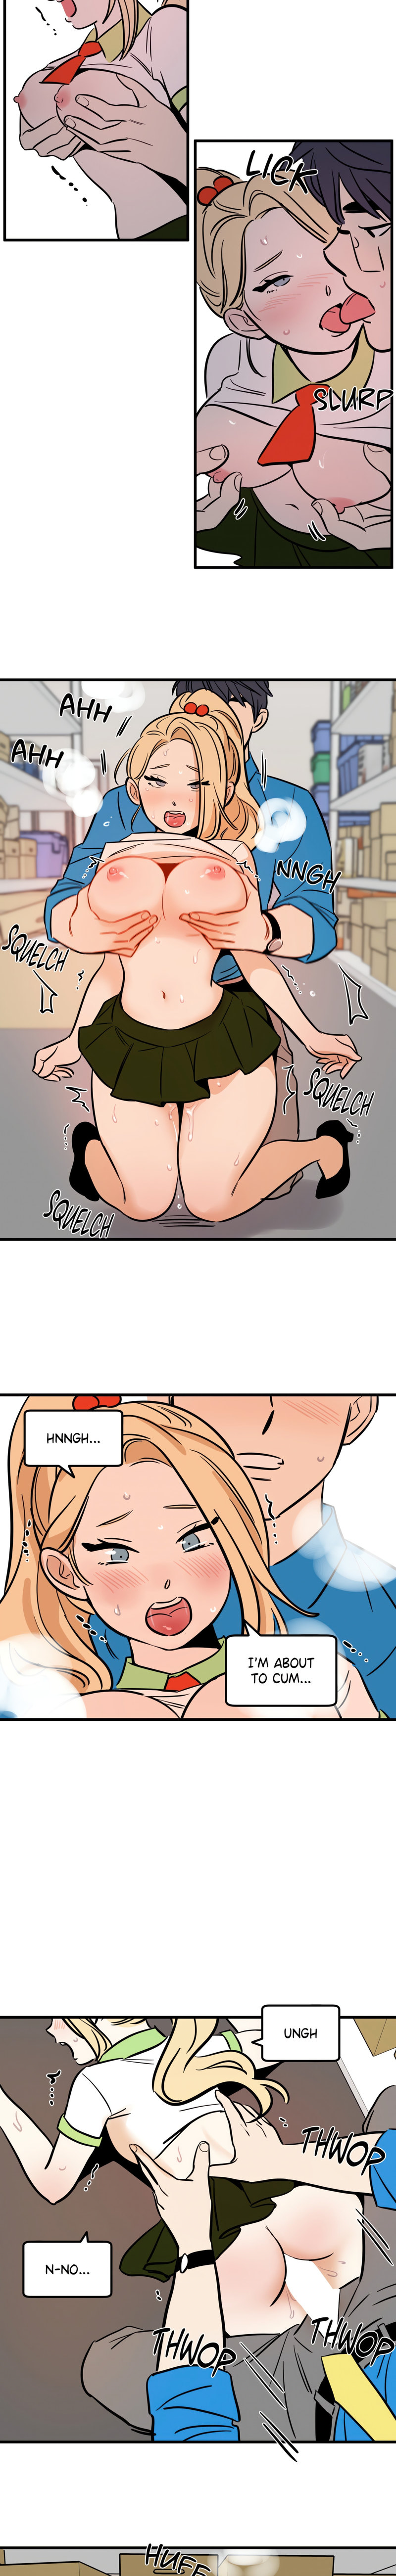 Naughty Positions - Chapter 8 Page 4